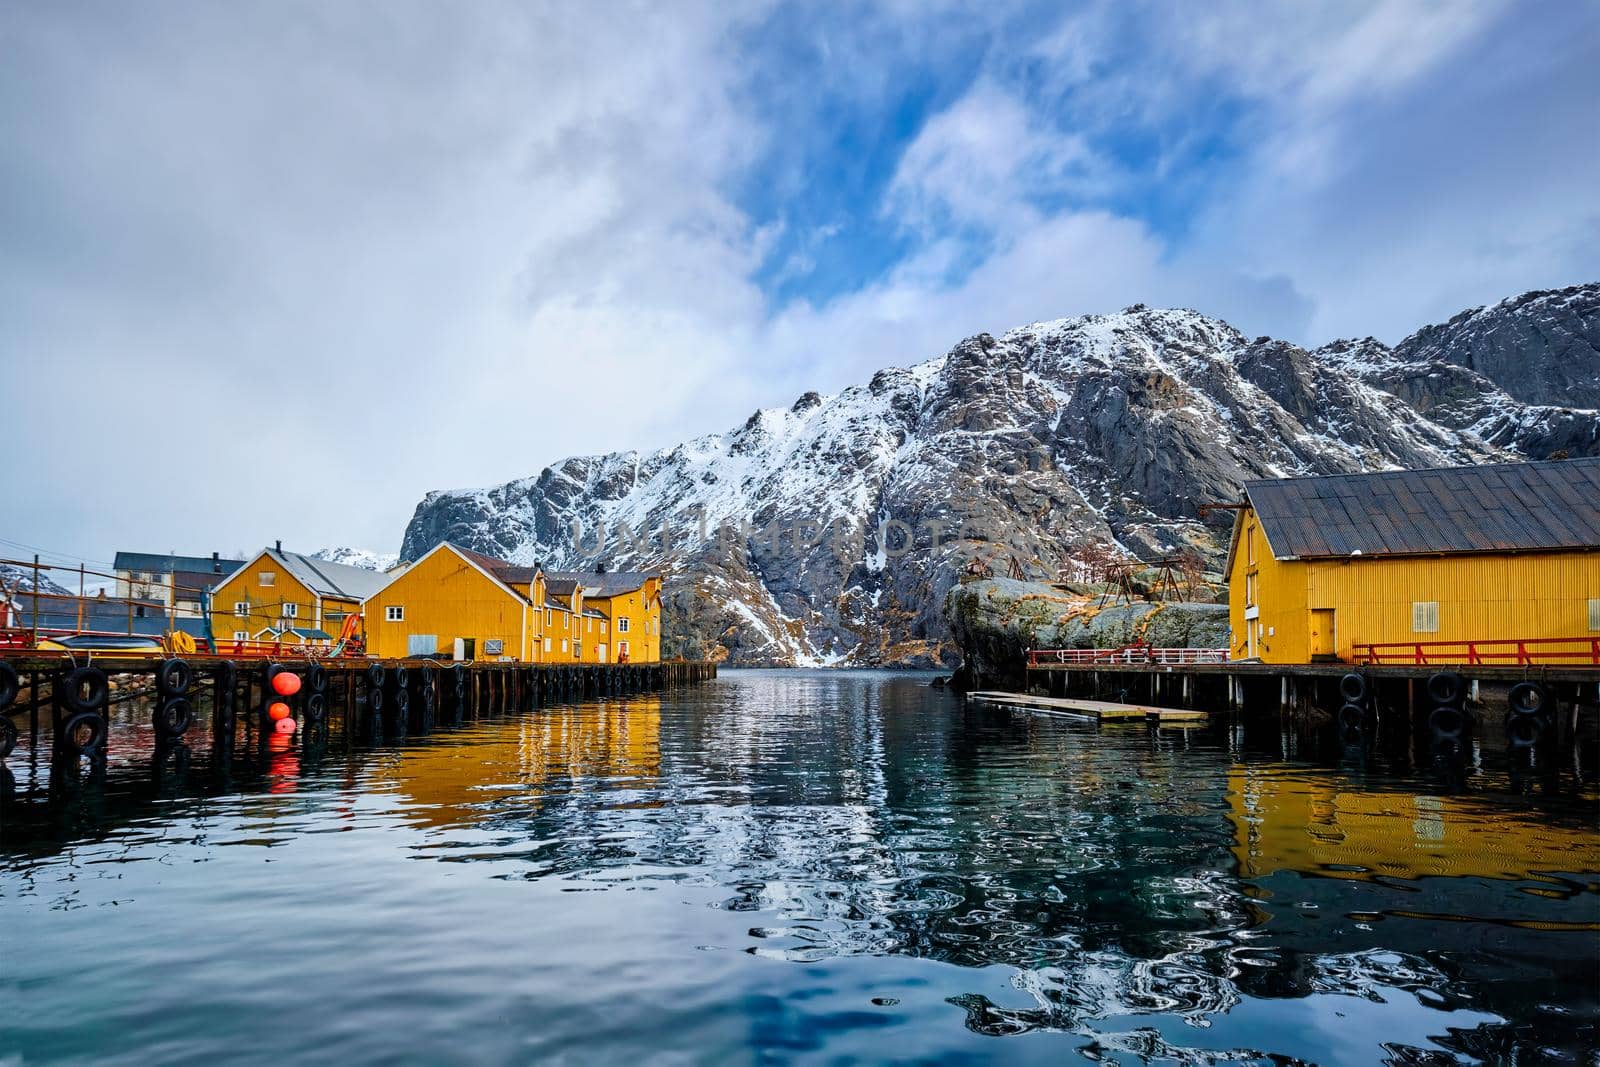 Nusfjord fishing village in Norway by dimol